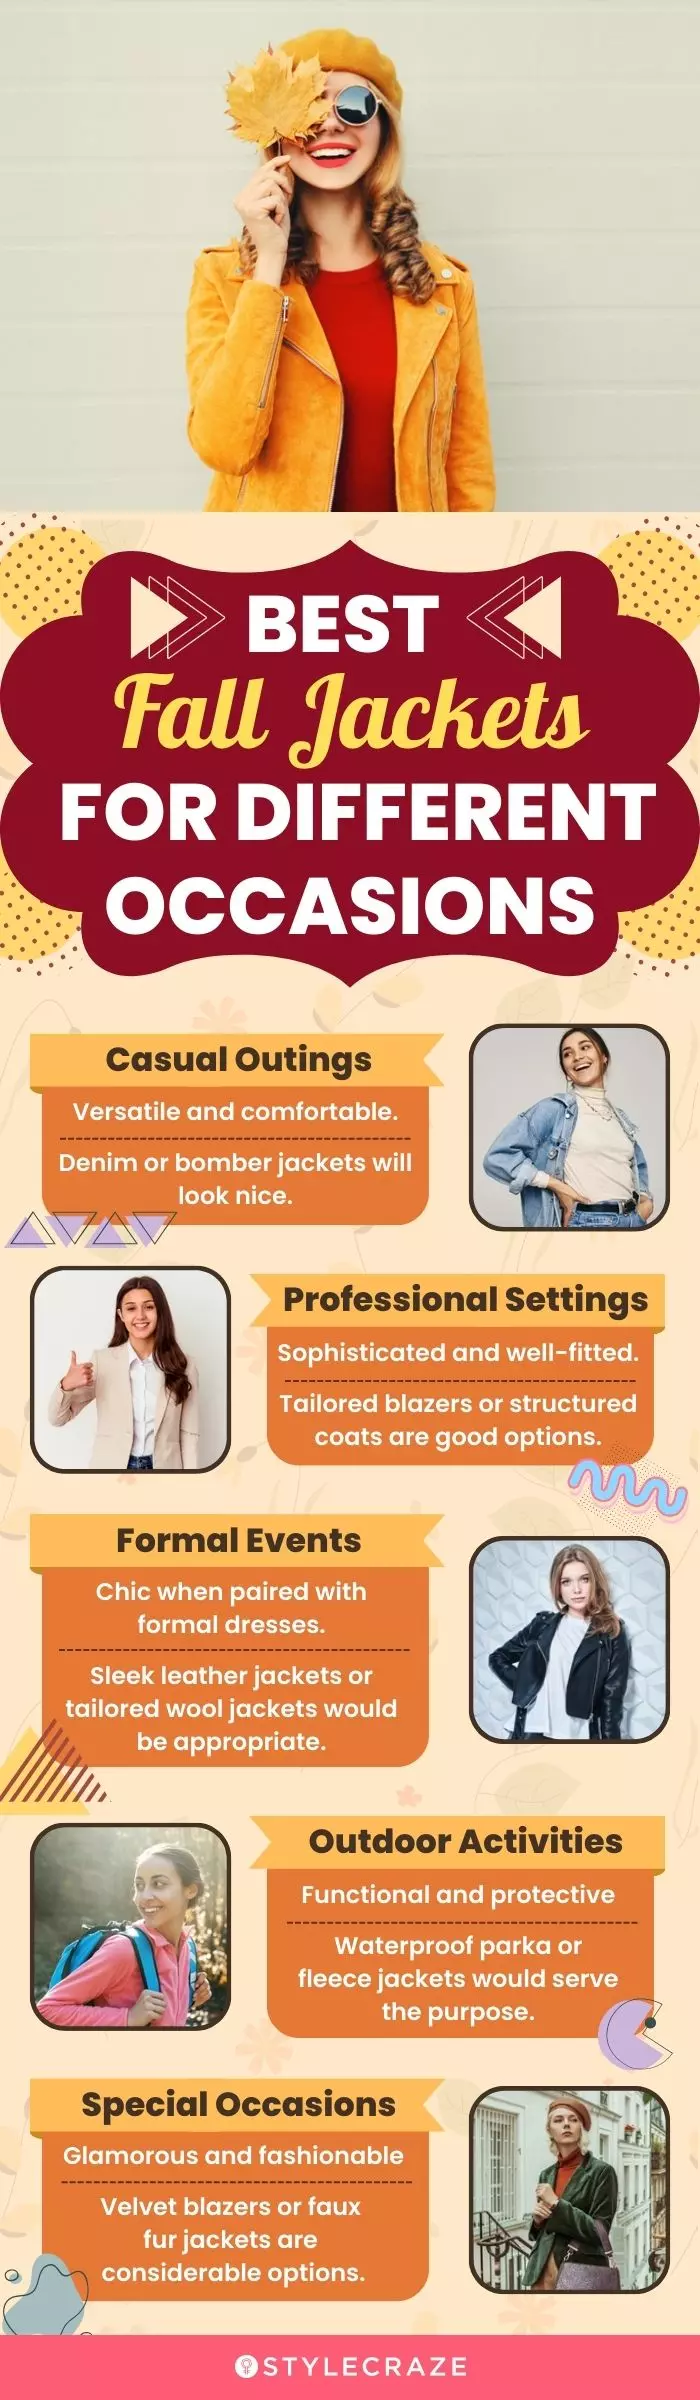 Best Fall Jackets For Different Occasions (infographic)